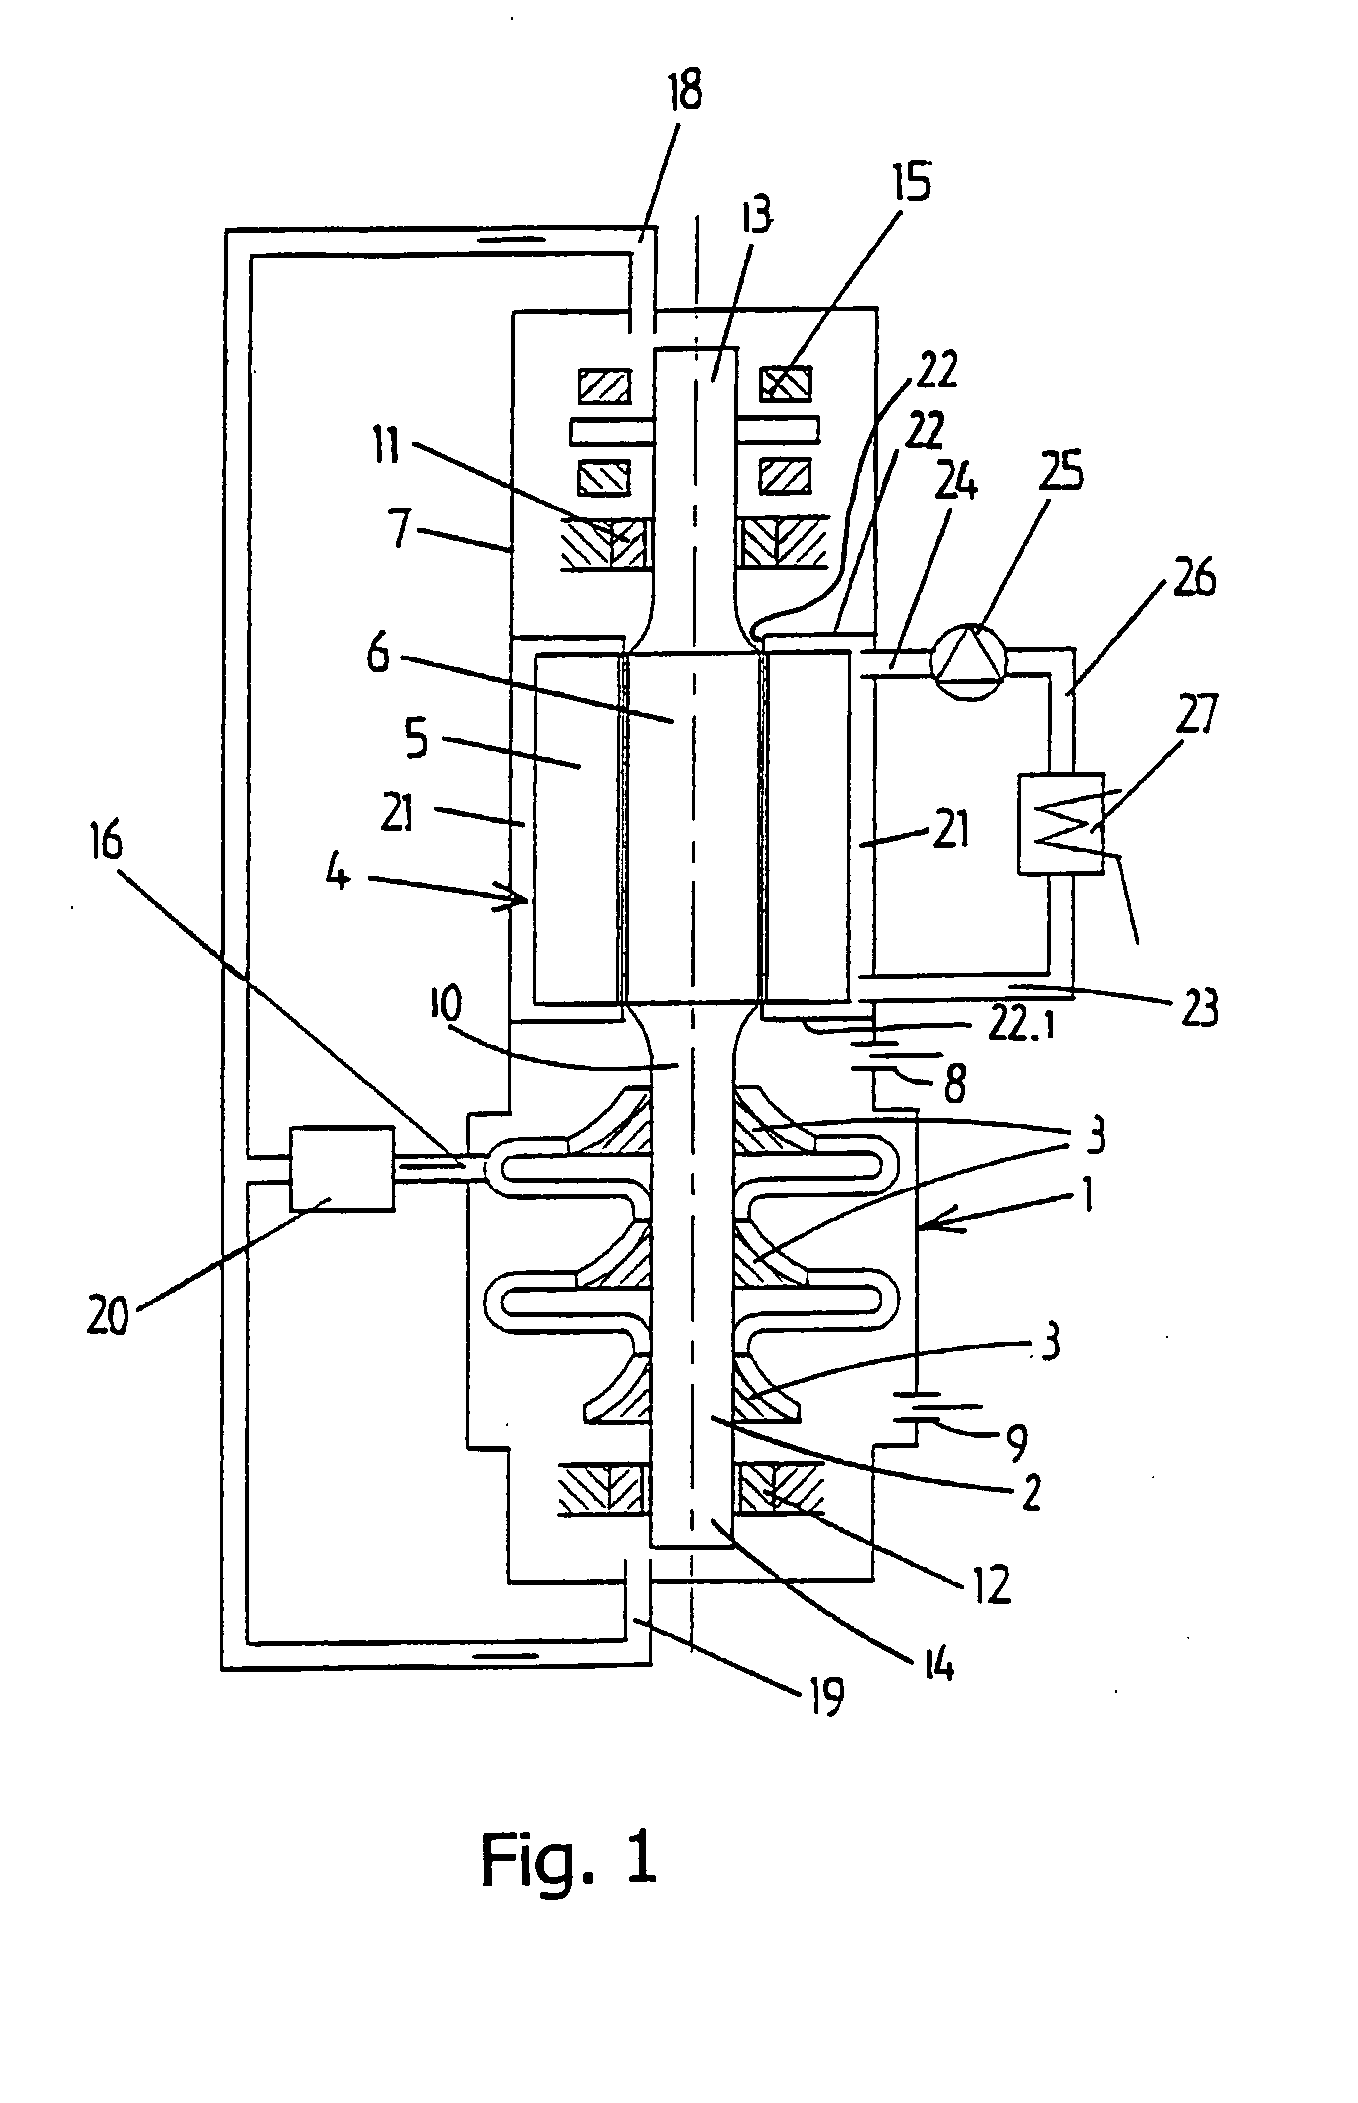 Rotor for Electric Motor, Compressor Unit Provided with Rotor, Method for Producing a Rotor for an Electric Motor